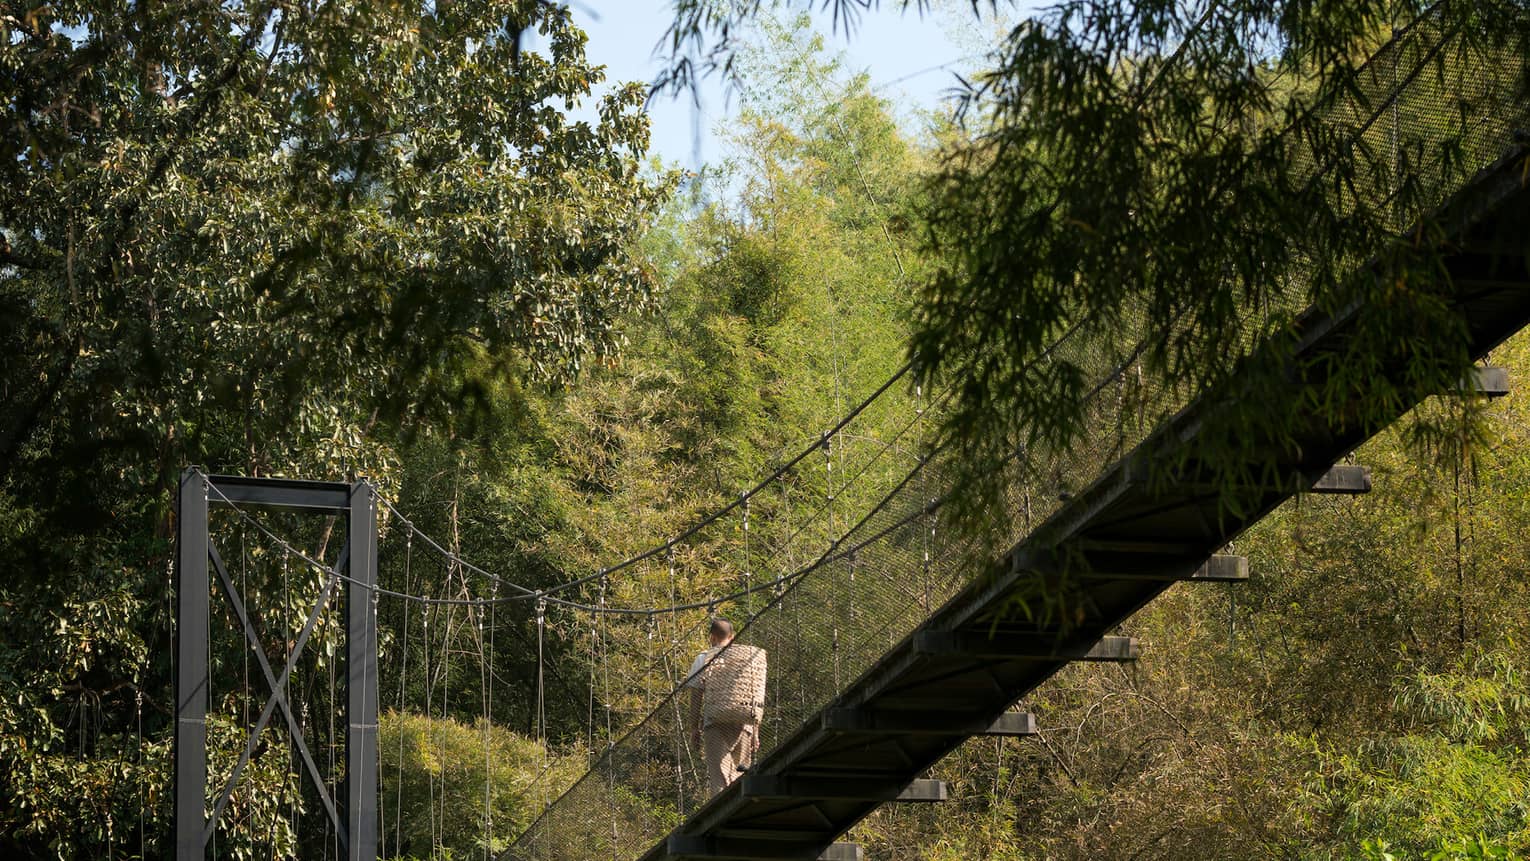 Man with woven basket on back walks across suspension bridge over tropical trees